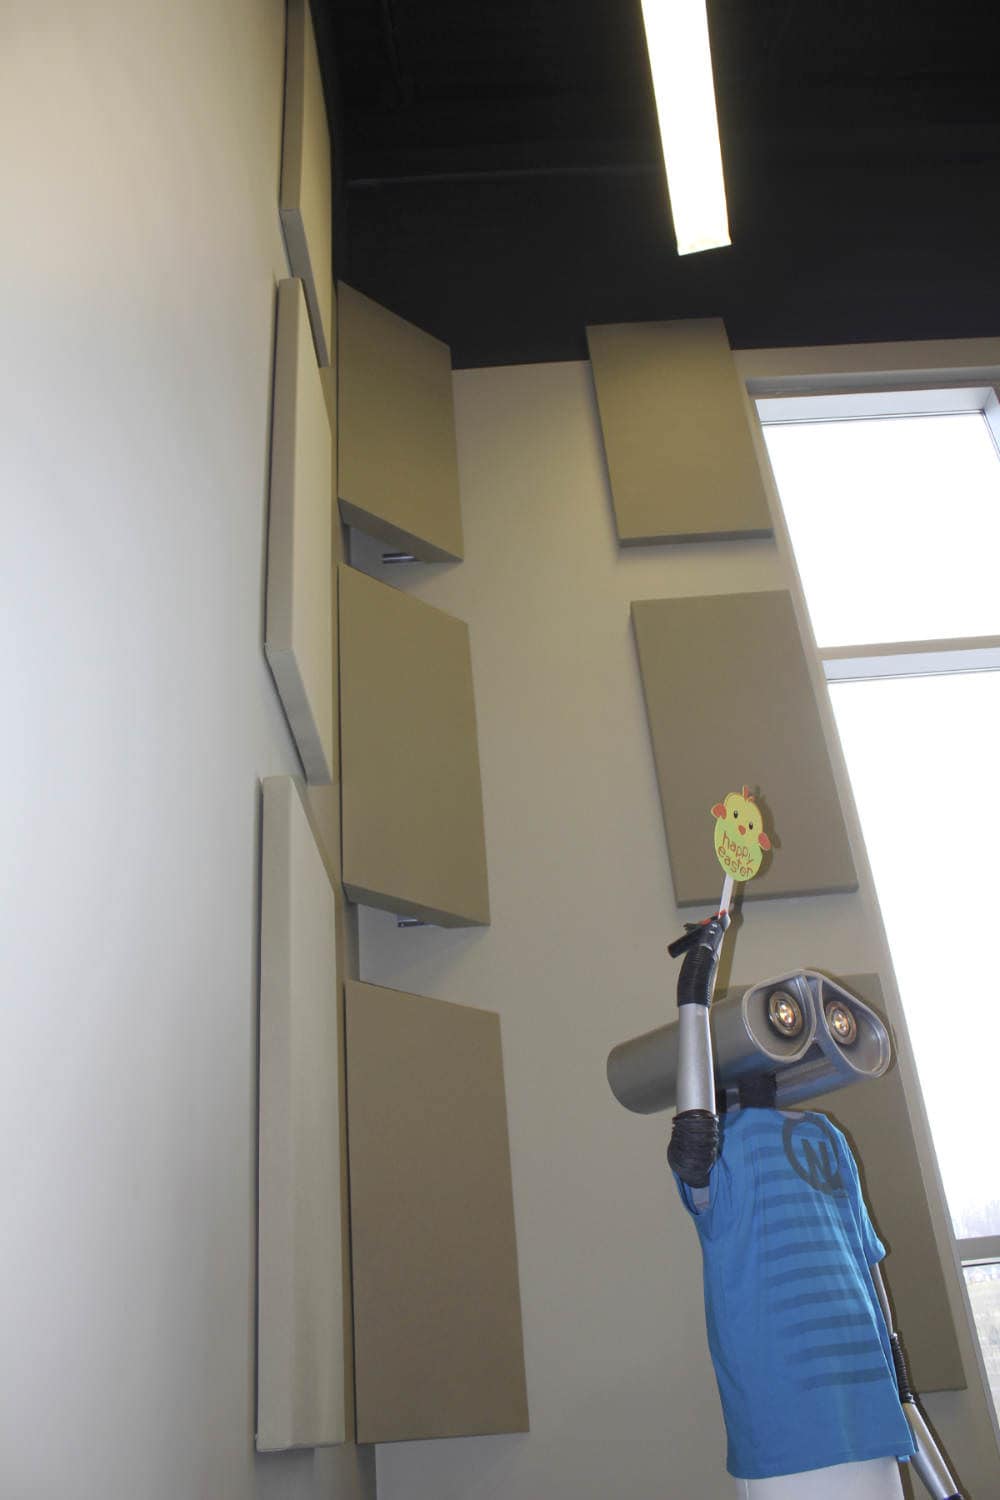 Children's Center with Standard Series acoustic panels and Bass Traps